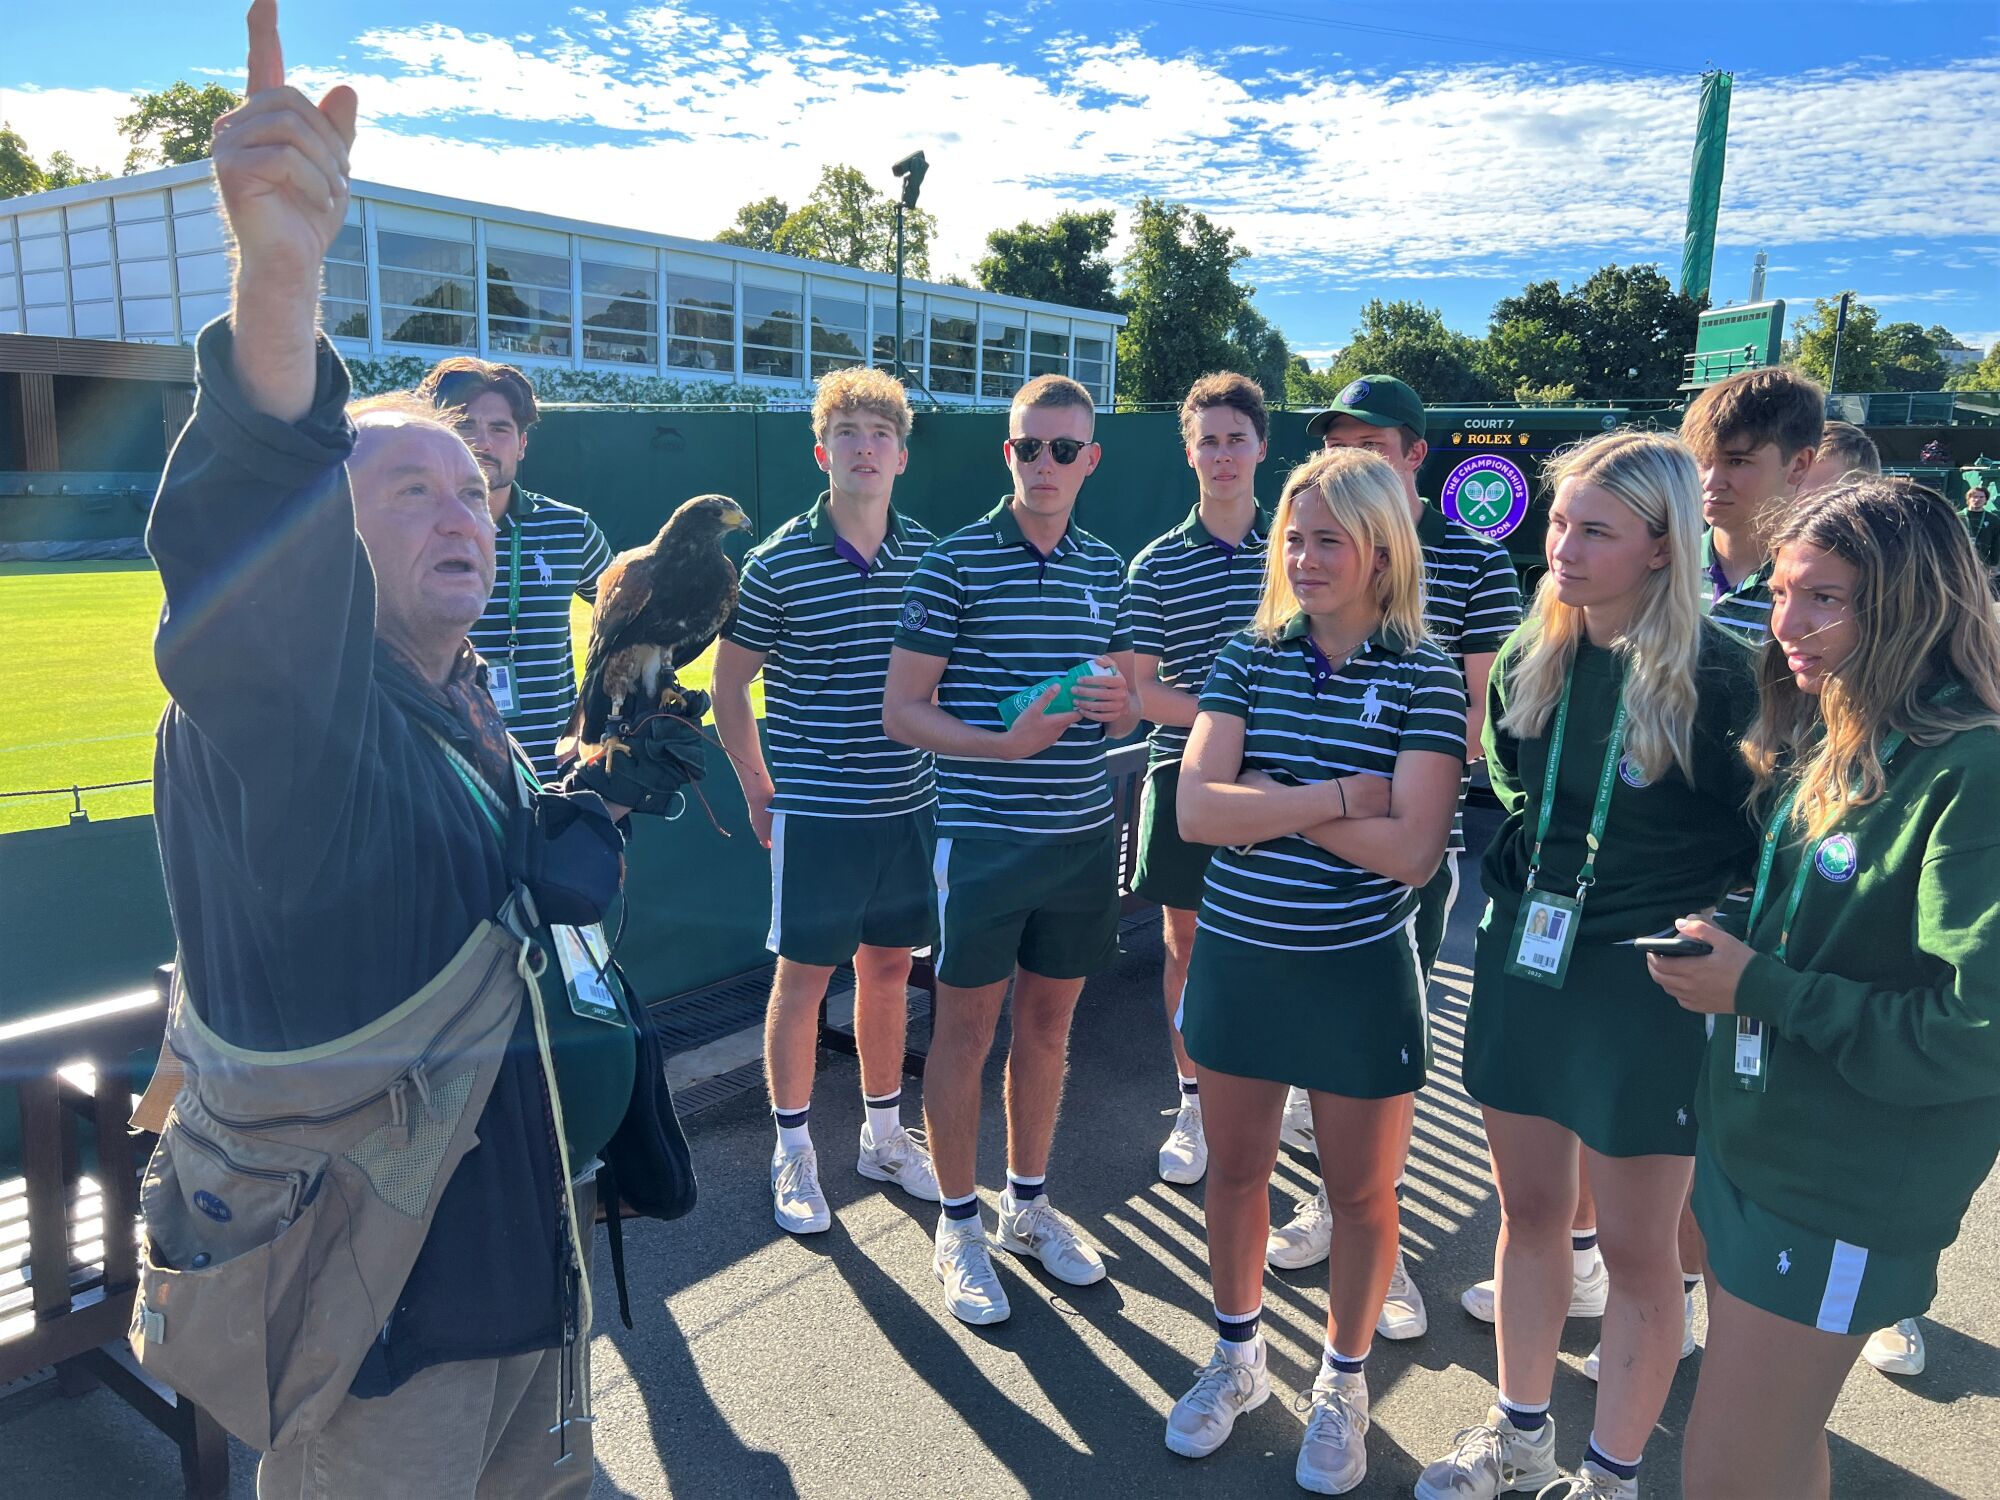 Wayne Davis introduces Rufus to Wimbledon ball boys and girls in the morning before spectators arrive and play begins.